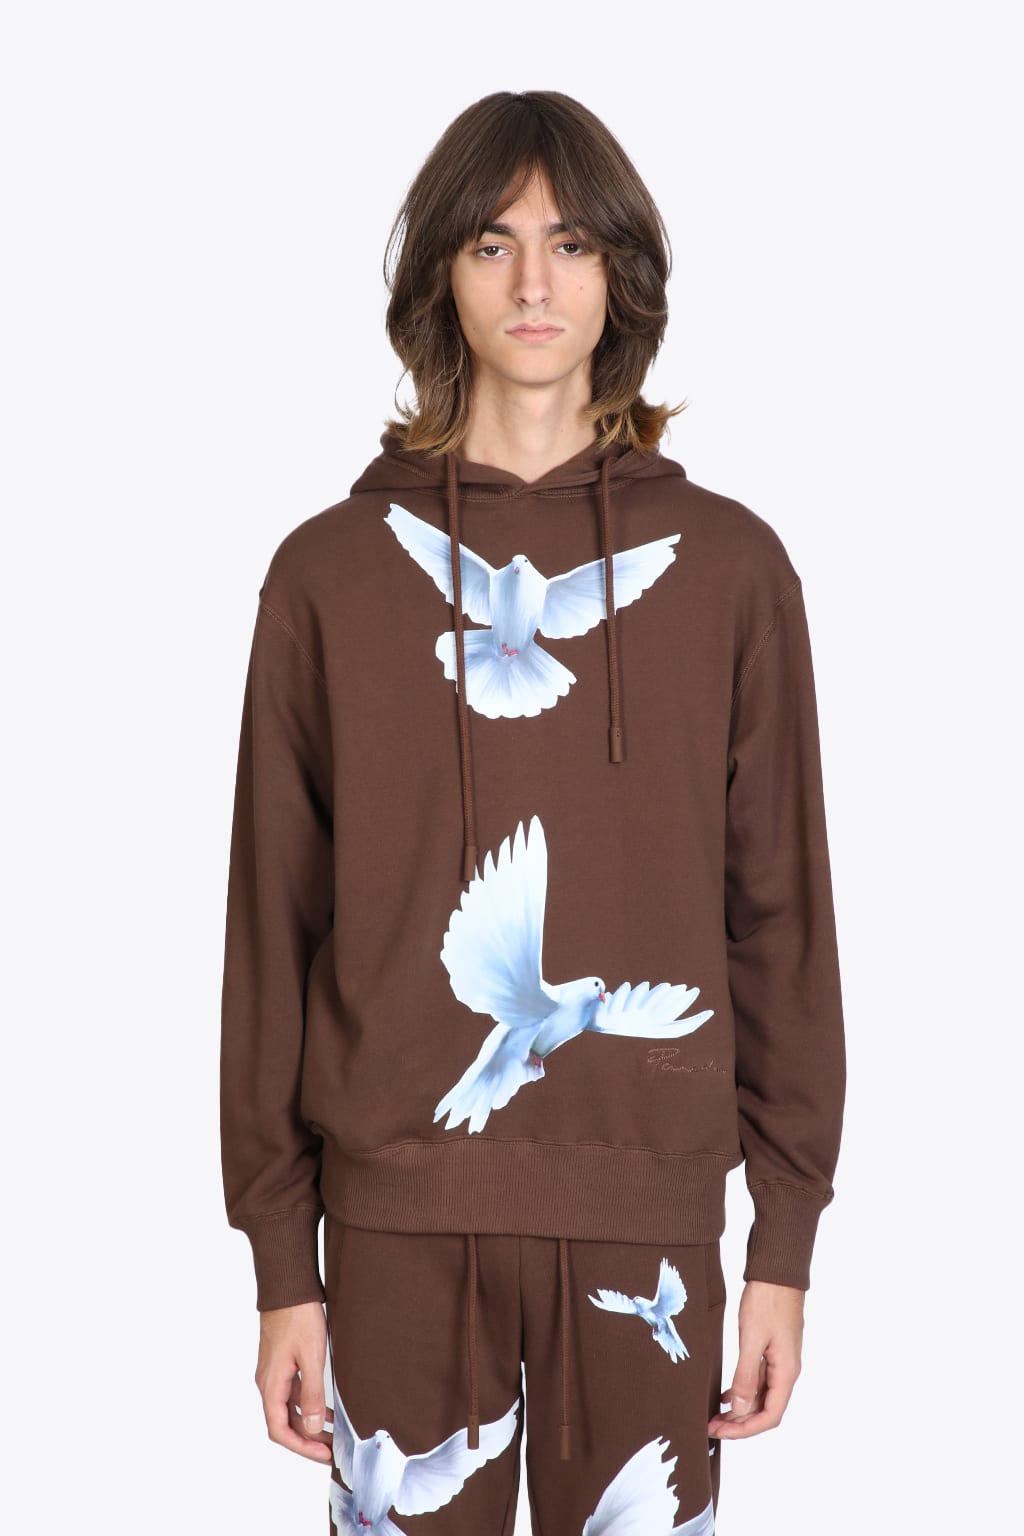 3paradis Sweater Brown Cotton Hoodie With Dove Prints. In Marrone